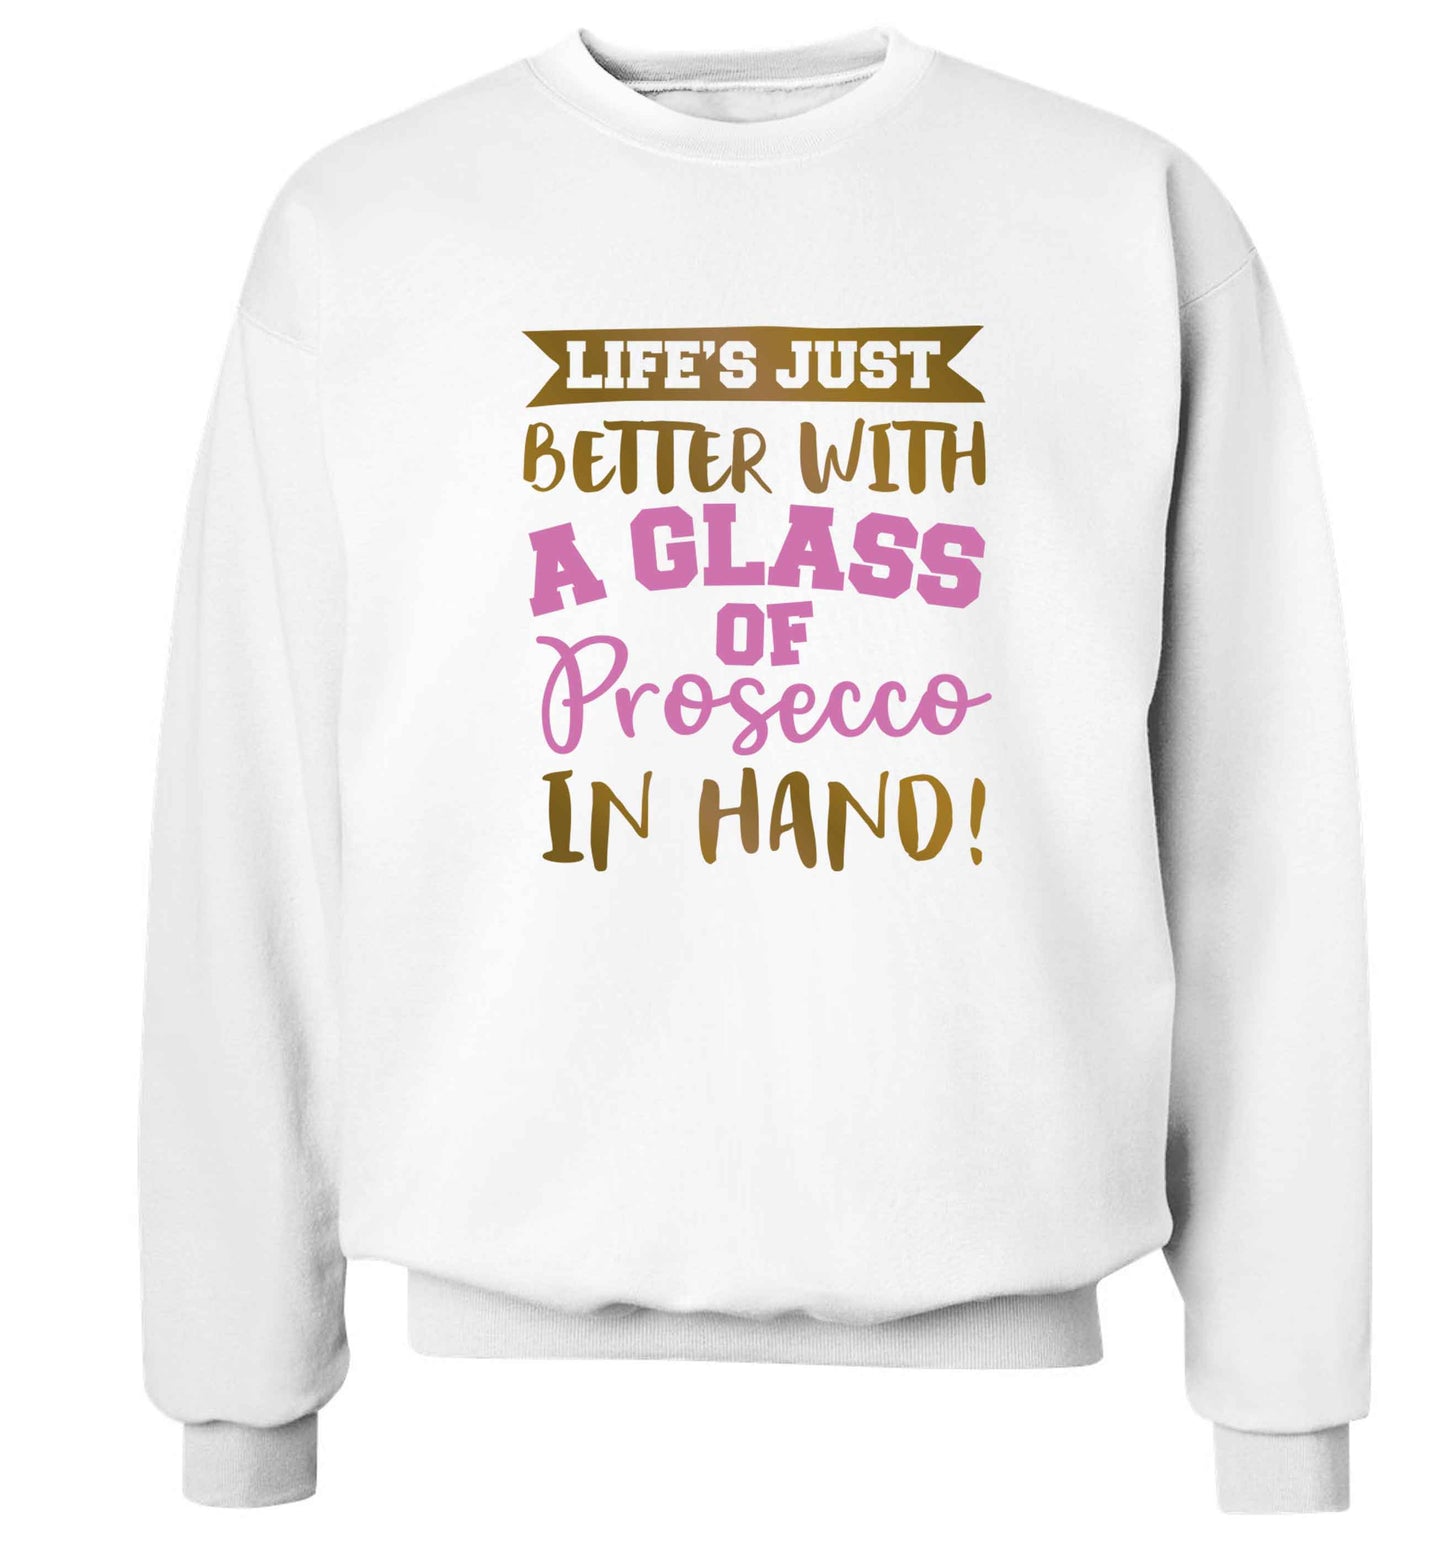 Life's just better with a glass of prosecco in hand Adult's unisex white Sweater 2XL